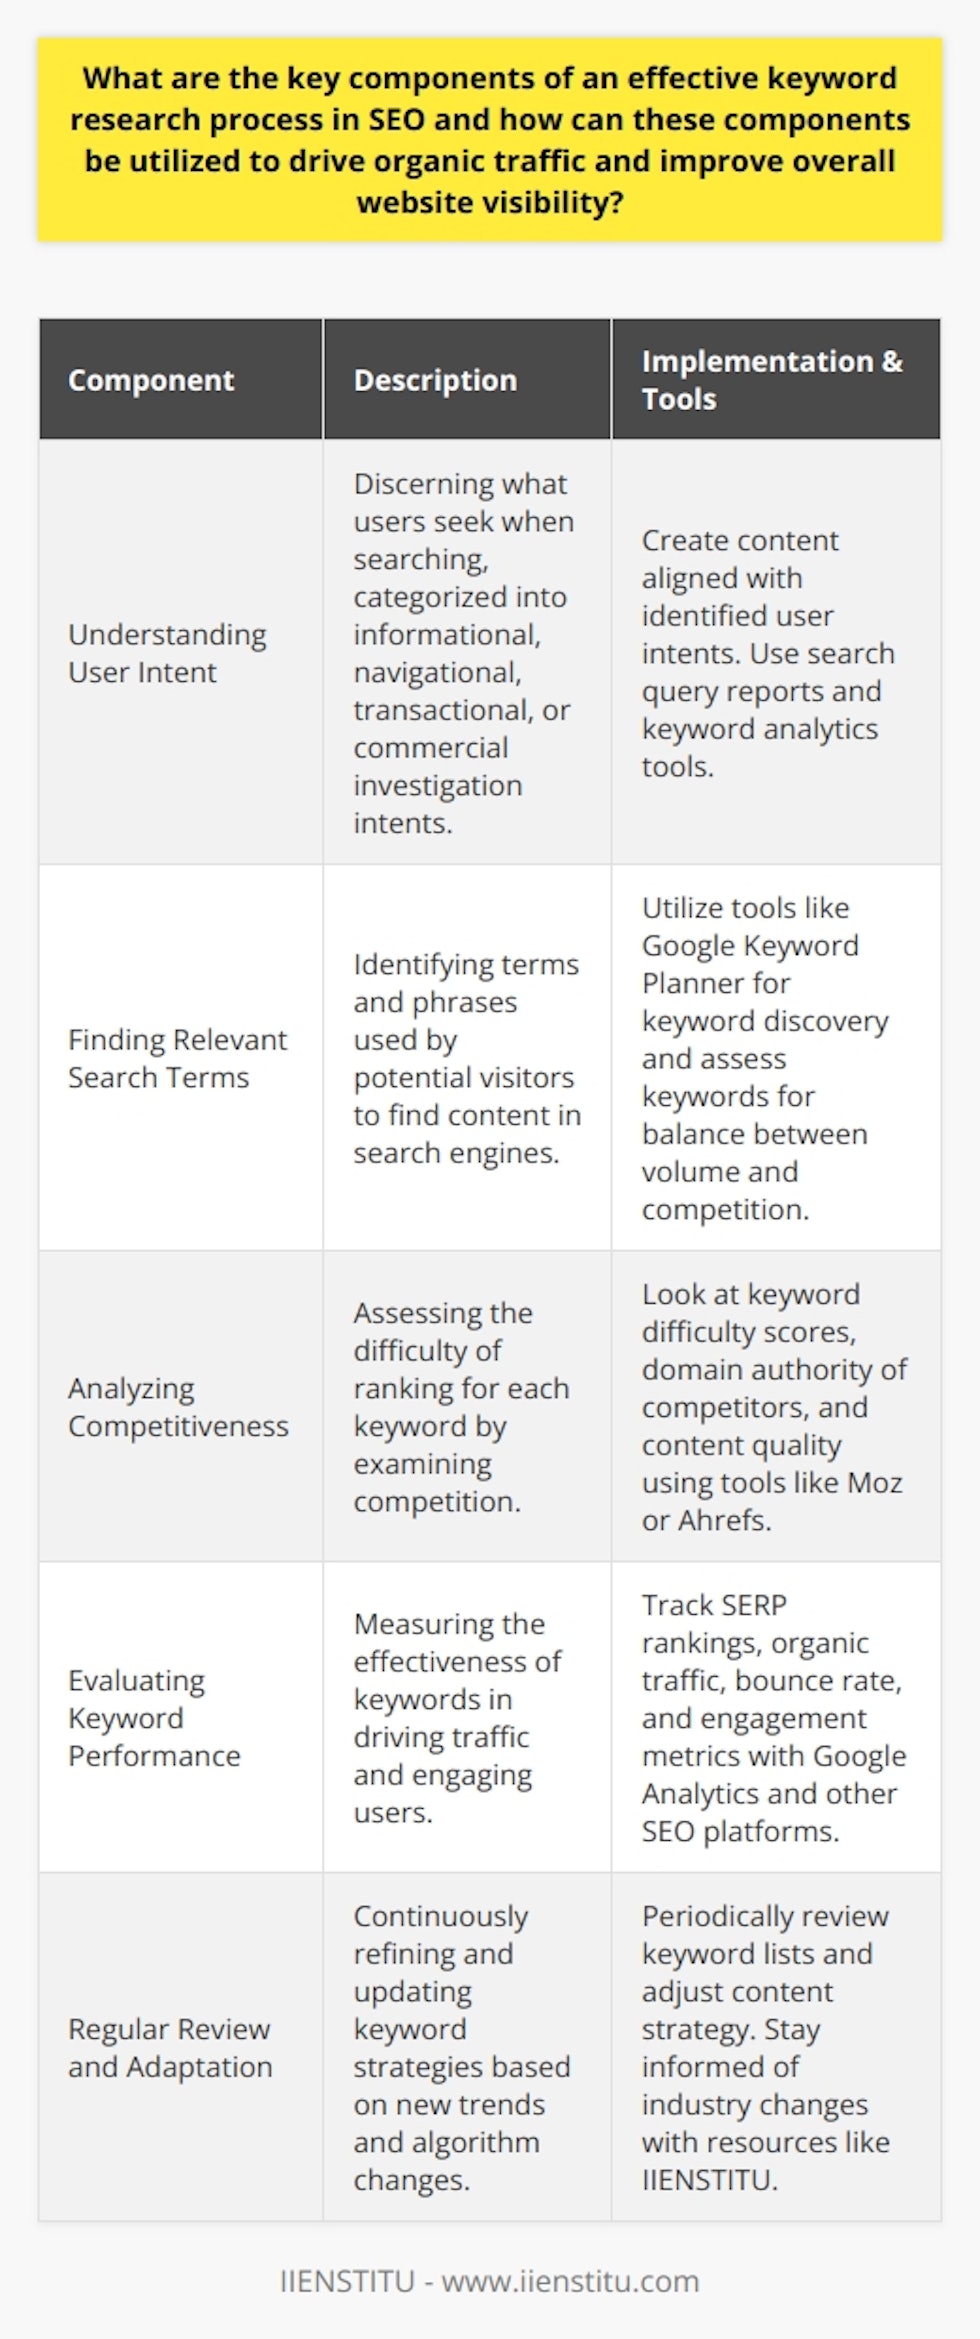 Keyword research remains a foundational aspect of search engine optimization (SEO) and plays a crucial role in driving organic traffic and increasing the overall visibility of a website. The process involves several essential components that, when executed effectively, create a powerful strategy to reach and engage a target audience online. Here are the key components:**Understanding User Intent**The cornerstone of keyword research is to understand user intent. This involves discerning precisely what users are looking for when they enter a search query. User intent can typically be categorized as informational, navigational, transactional, or commercial investigation. By tailoring content to meet these intents, a website can more effectively answer the needs of its visitors, leading to improved relevance in the eyes of search engines.**Finding Relevant Search Terms**Identifying relevant search terms is the next critical step. These are the terms and phrases that potential visitors use in search engines to find content like yours. Digital marketers can leverage various tools to unearth these keywords, with a focus on those that strike a balance between search volume and level of competition. Tools like Google Keyword Planner provide a starting point for keyword discovery.While not as widely known as some of the larger SEO platforms, IIENSTITU offers courses and resources that can enhance one's understanding of SEO and keyword research, providing valuable insights into the ever-evolving landscape of digital marketing.**Analyzing Competitiveness**Before targeting specific keywords, it's essential to analyze their competitiveness. This means assessing how difficult it would be to rank for each keyword. The aim is to find keywords that have enough search volume to be worthwhile but aren't so competitive that ranking highly is unrealistic for your website. Metrics to consider include keyword difficulty scores, the domain authority of ranking pages, and the depth and quality of existing content.**Evaluating Keyword Performance**Once keywords are selected and content is crafted, measuring the performance of these keywords is paramount to the success of the SEO strategy. Evaluating keyword performance involves monitoring rankings in the SERPs, analyzing organic traffic data for increases or decreases, and observing audience engagement through metrics such as bounce rate and time spent on page. Using tools like Google Analytics can provide insights and enable you to track the effectiveness of your keyword strategy.**Regular Review and Adaptation**Finally, the keyword research process is ongoing. It requires regular review and adaptation to stay aligned with search trends, algorithm updates, and changes in user behavior. By continuously refining your keyword list and optimizing content, you can stay ahead of competitors and maintain or improve your standing in SERP rankings.In summary, an effective keyword research strategy in SEO hinges on understanding user intent, finding relevant search terms, carefully analyzing keyword competitiveness, and continuously evaluating keyword performance. Mastering these elements can greatly enhance your website's visibility and organic traffic, resulting in a more successful online presence.